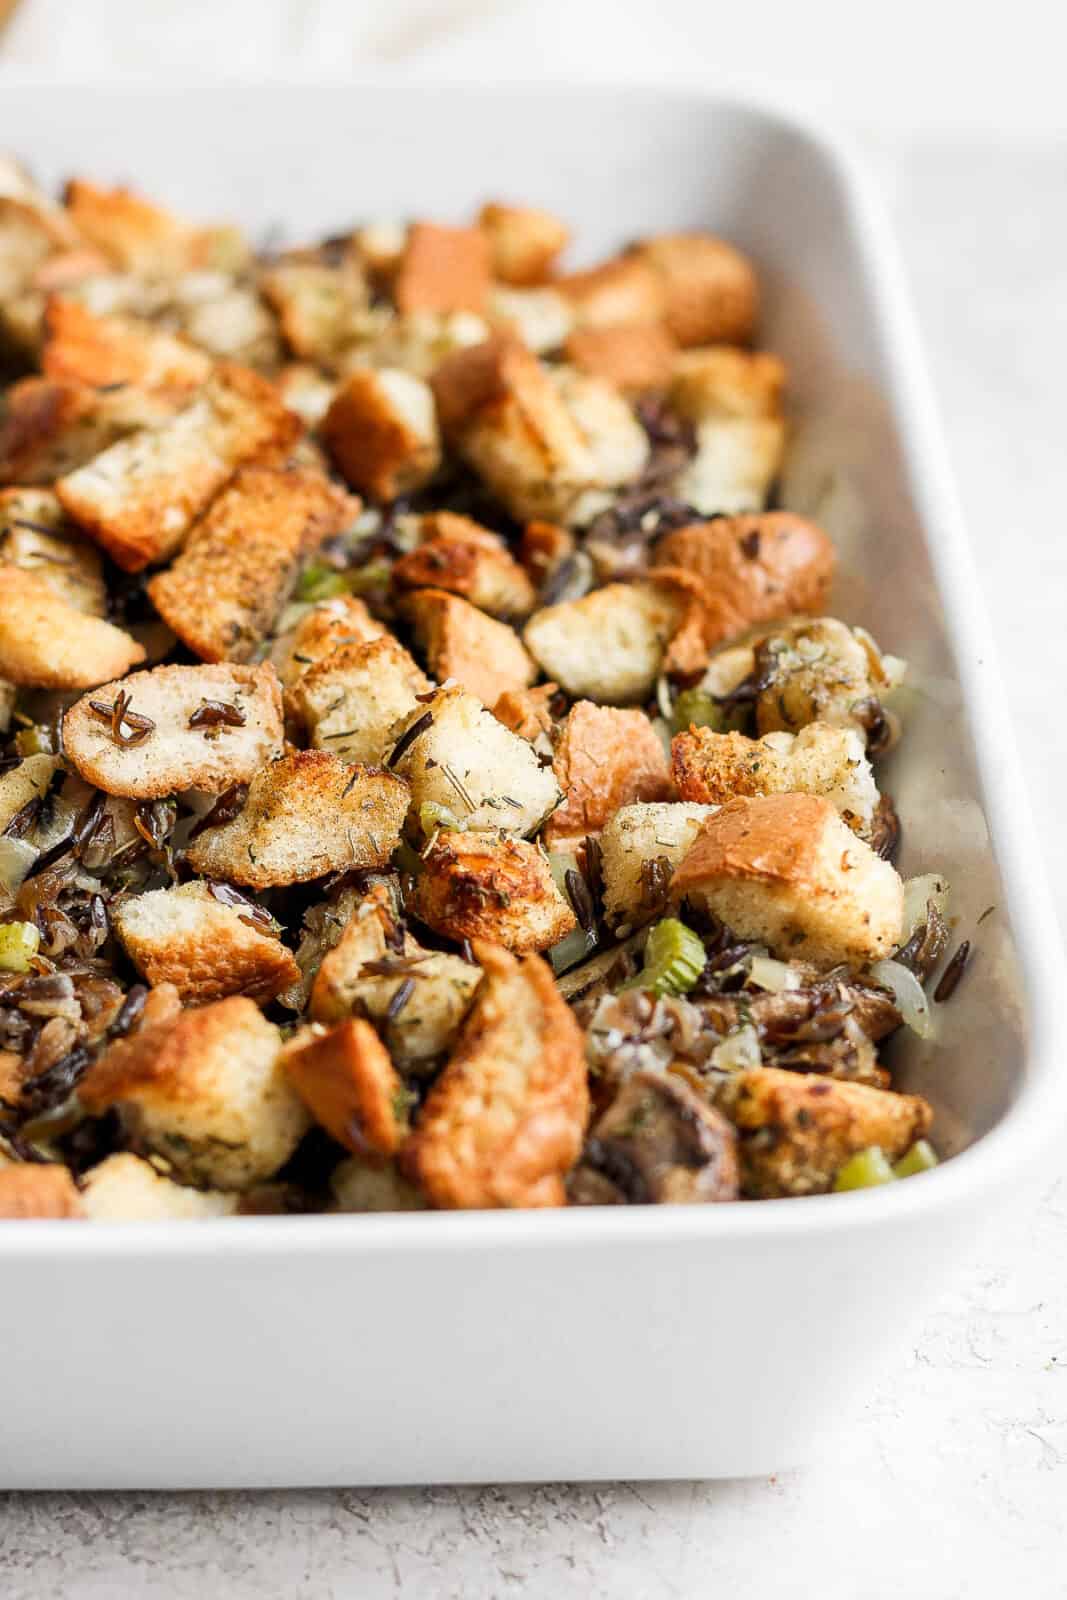 Wild rice stuffing in a baking dish.